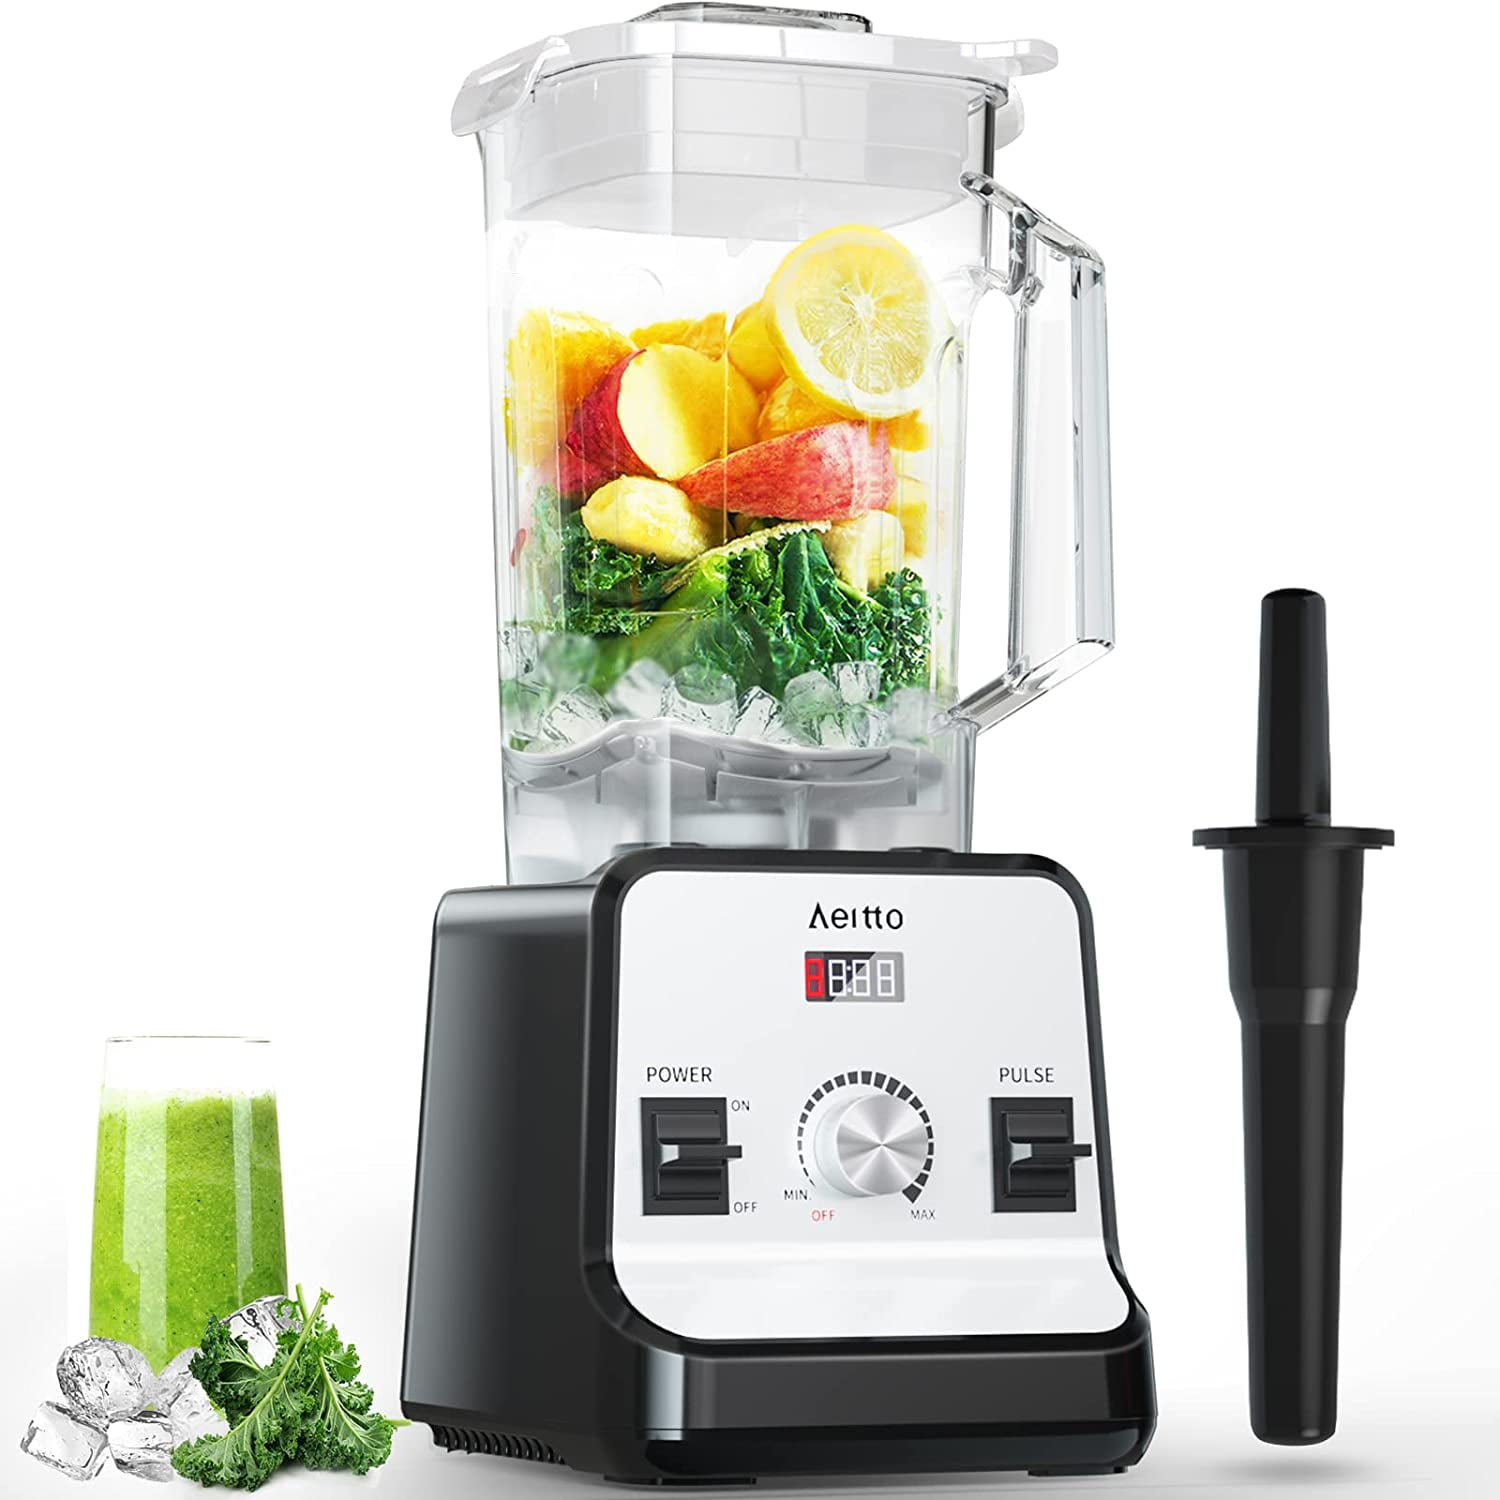 VAVSEA 1000W Countertop Blender for Shake and Smoothies, with 51oz Glass  Jar & 20oz Travel Cup, 5 Speed Multifunctional Blenders for Kitchen Ice  Crush